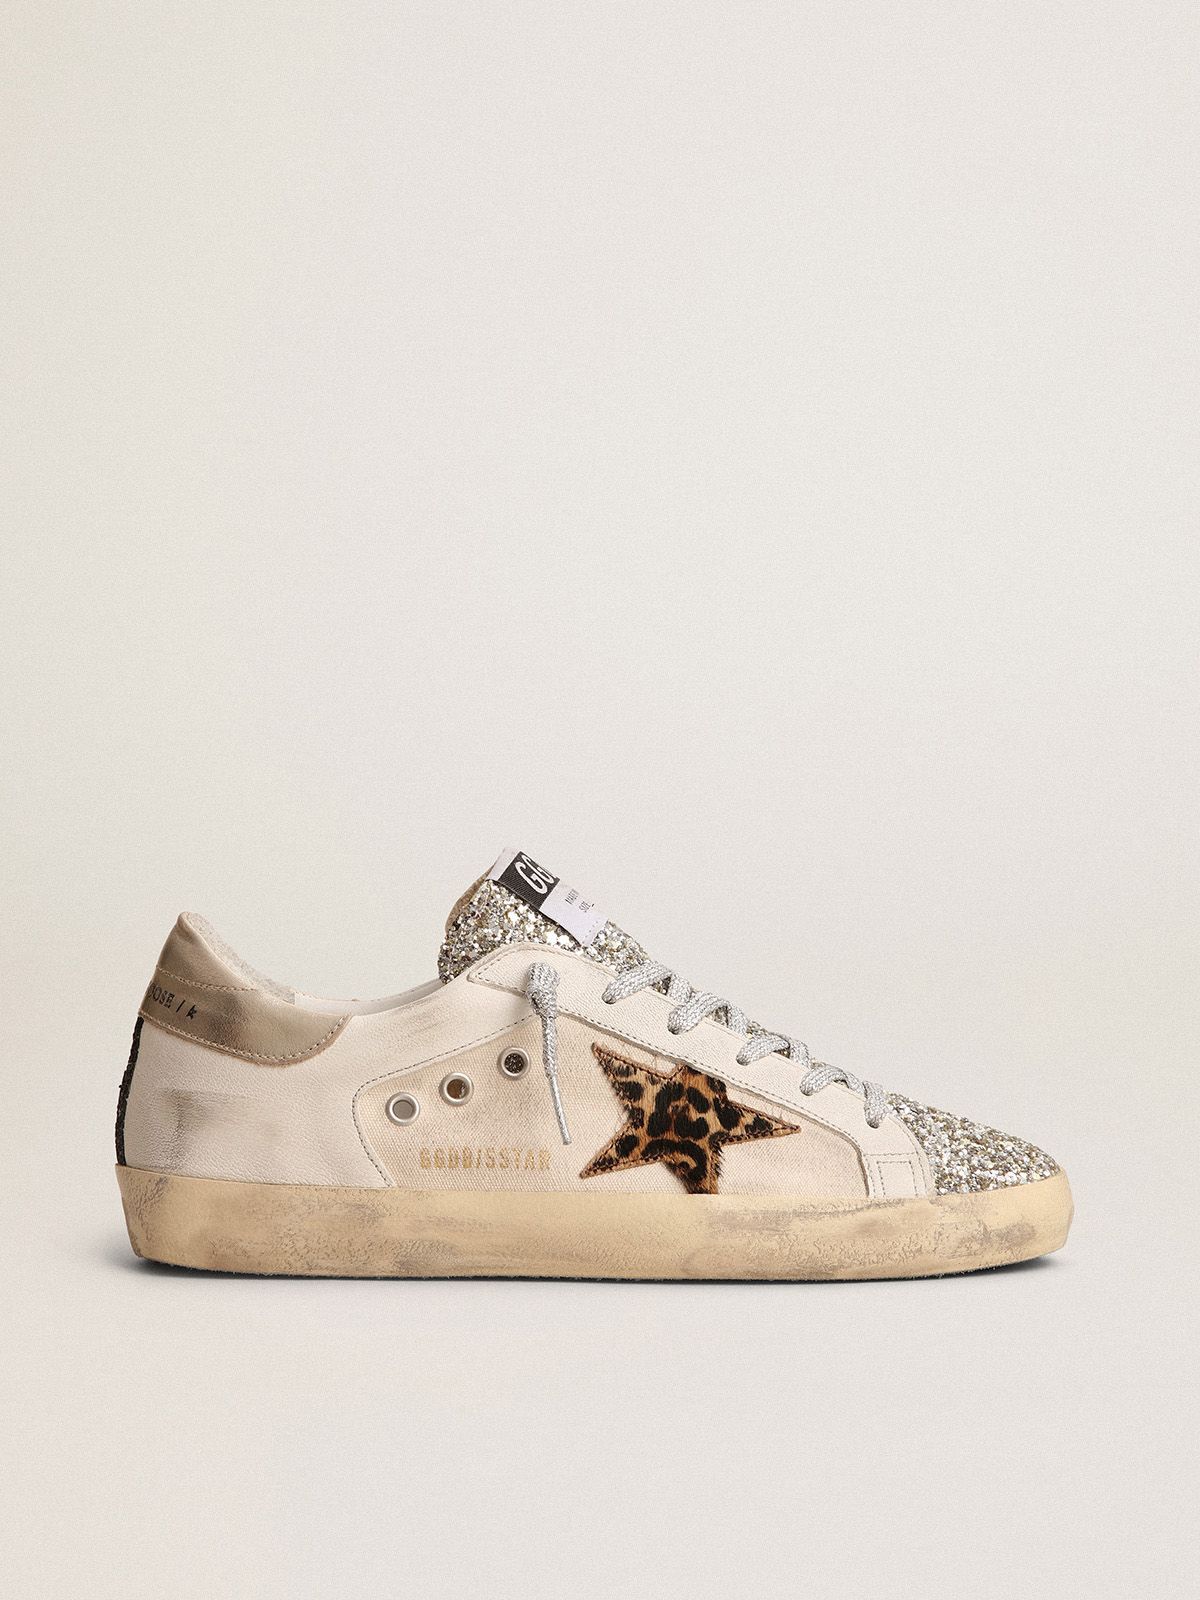 Super-Star sneakers with platinum-colored glitter tongue and leopard-print pony skin star